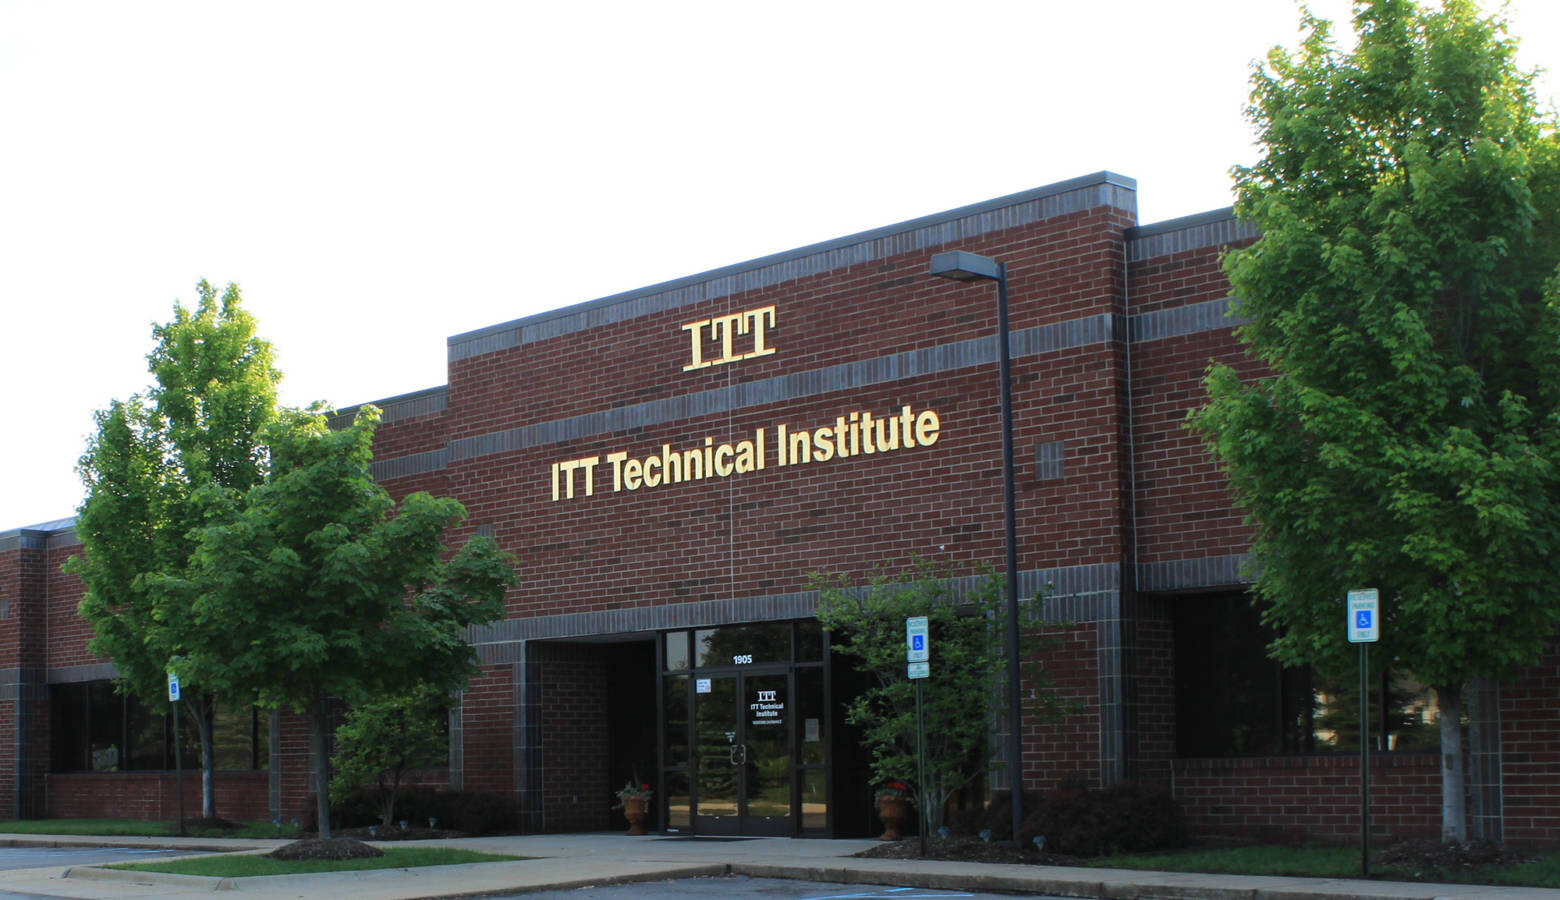 This week, former ITT Tech students said they’re relieved after the U.S. Department of Education announced it would forgive thousands of student loans associated with the school. (Dwight Burdette/Wikimedia Commons)